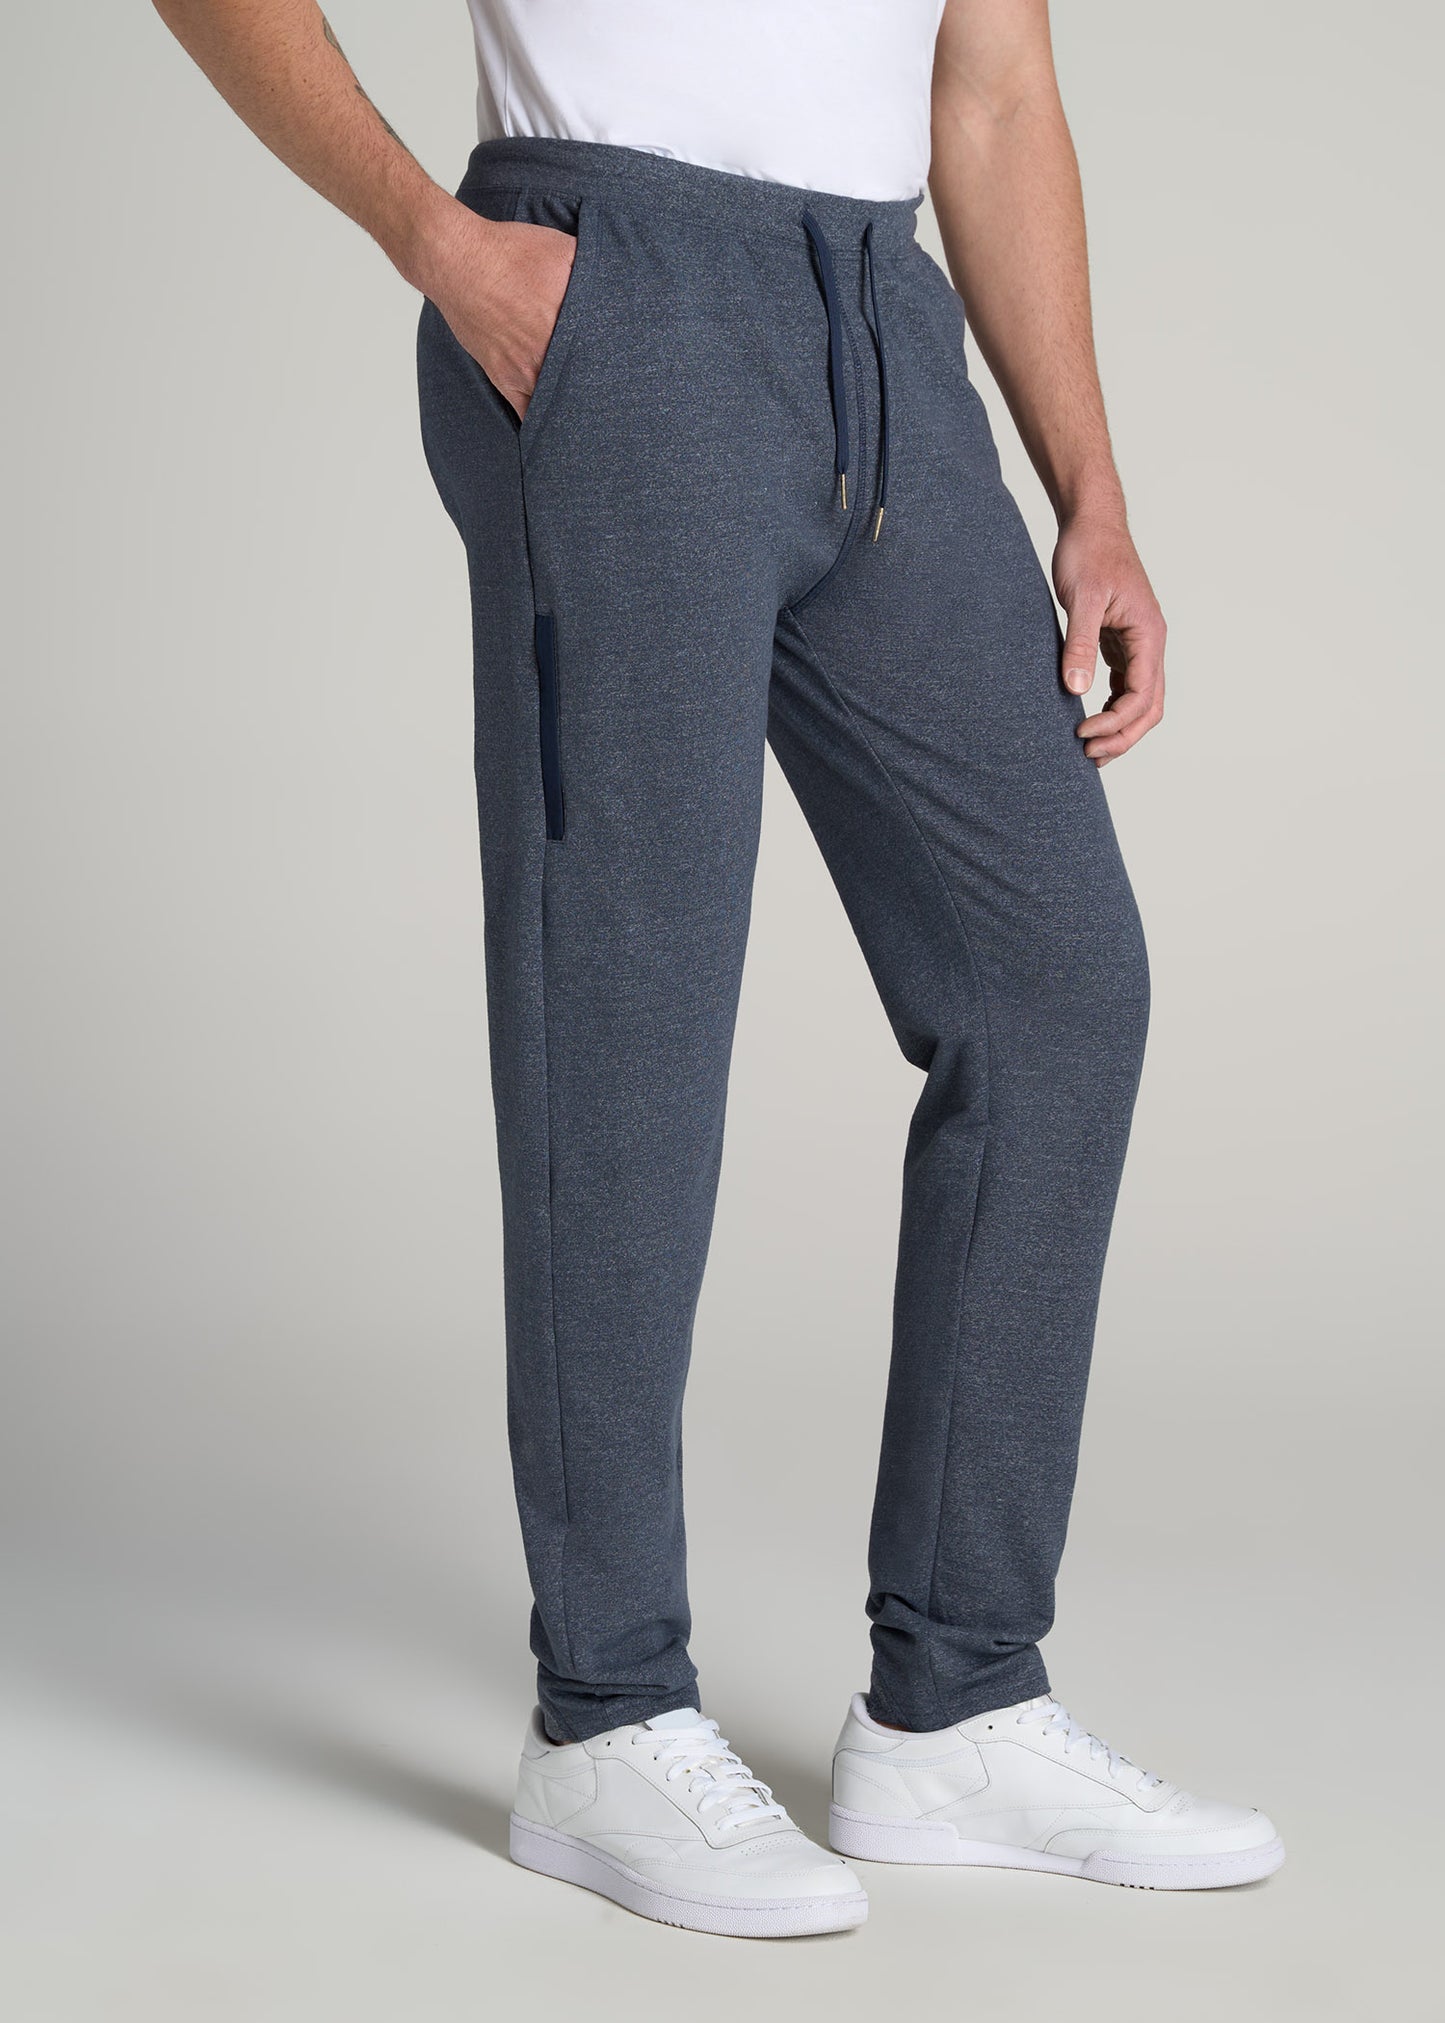       American-Tall-Men-Microsanded-French-Terry-Sweatpant-Navy-Mix-side